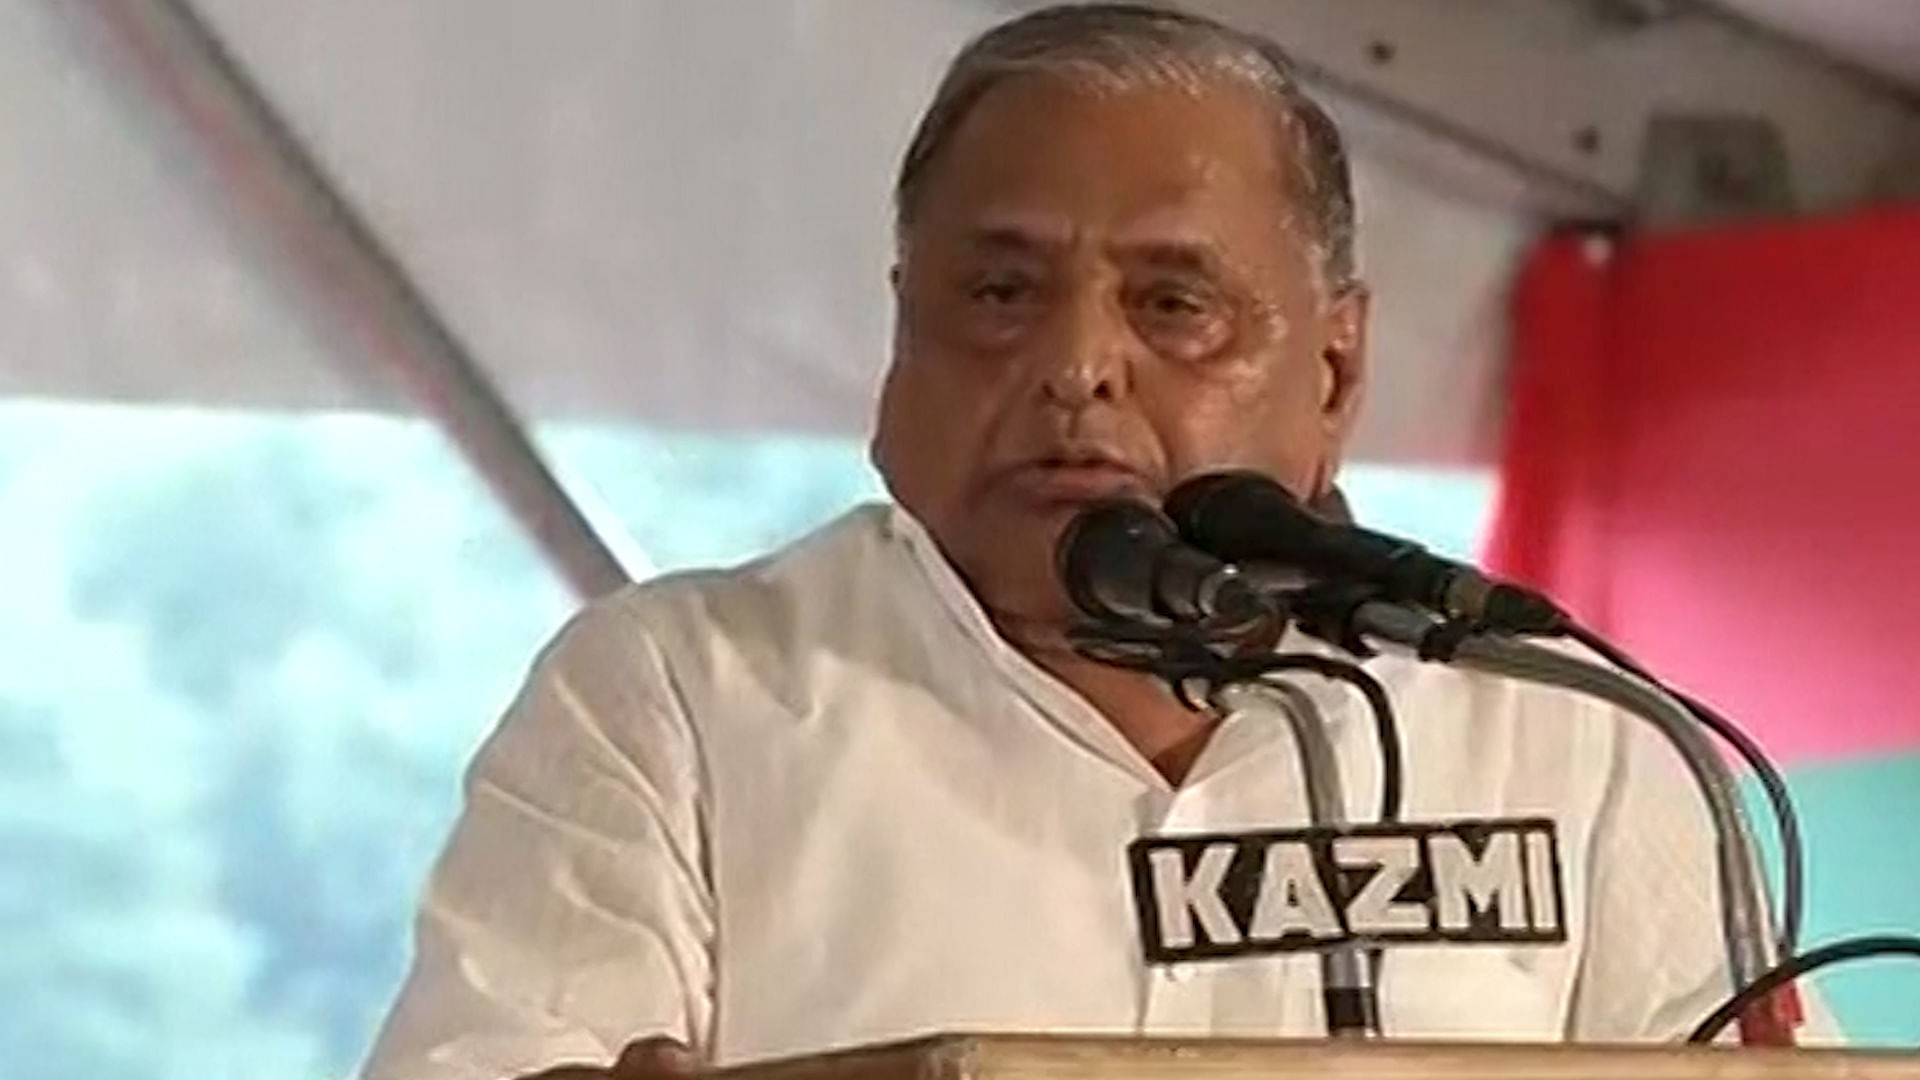 Mulayam Singh Yadav at a public event in Lucknow on Tuesday (Photo courtesy: ANI screengrab)